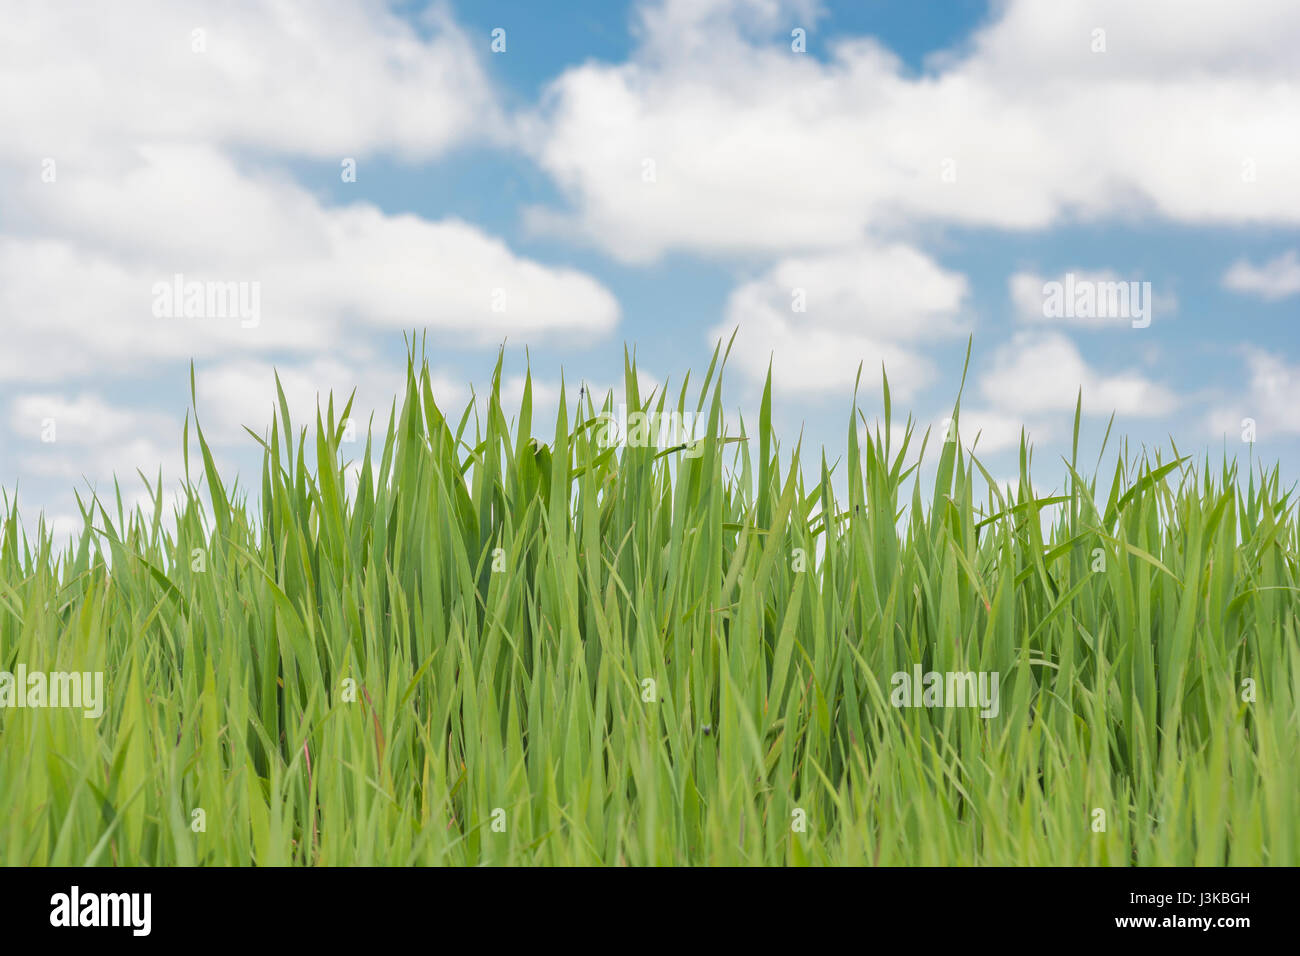 Fresh green grass shoots blue sky - metaphor for 'grass' sayings -  'Don’t Let the Grass Grow Under Your Feet, 'Head in the Clouds', economic growth. Stock Photo